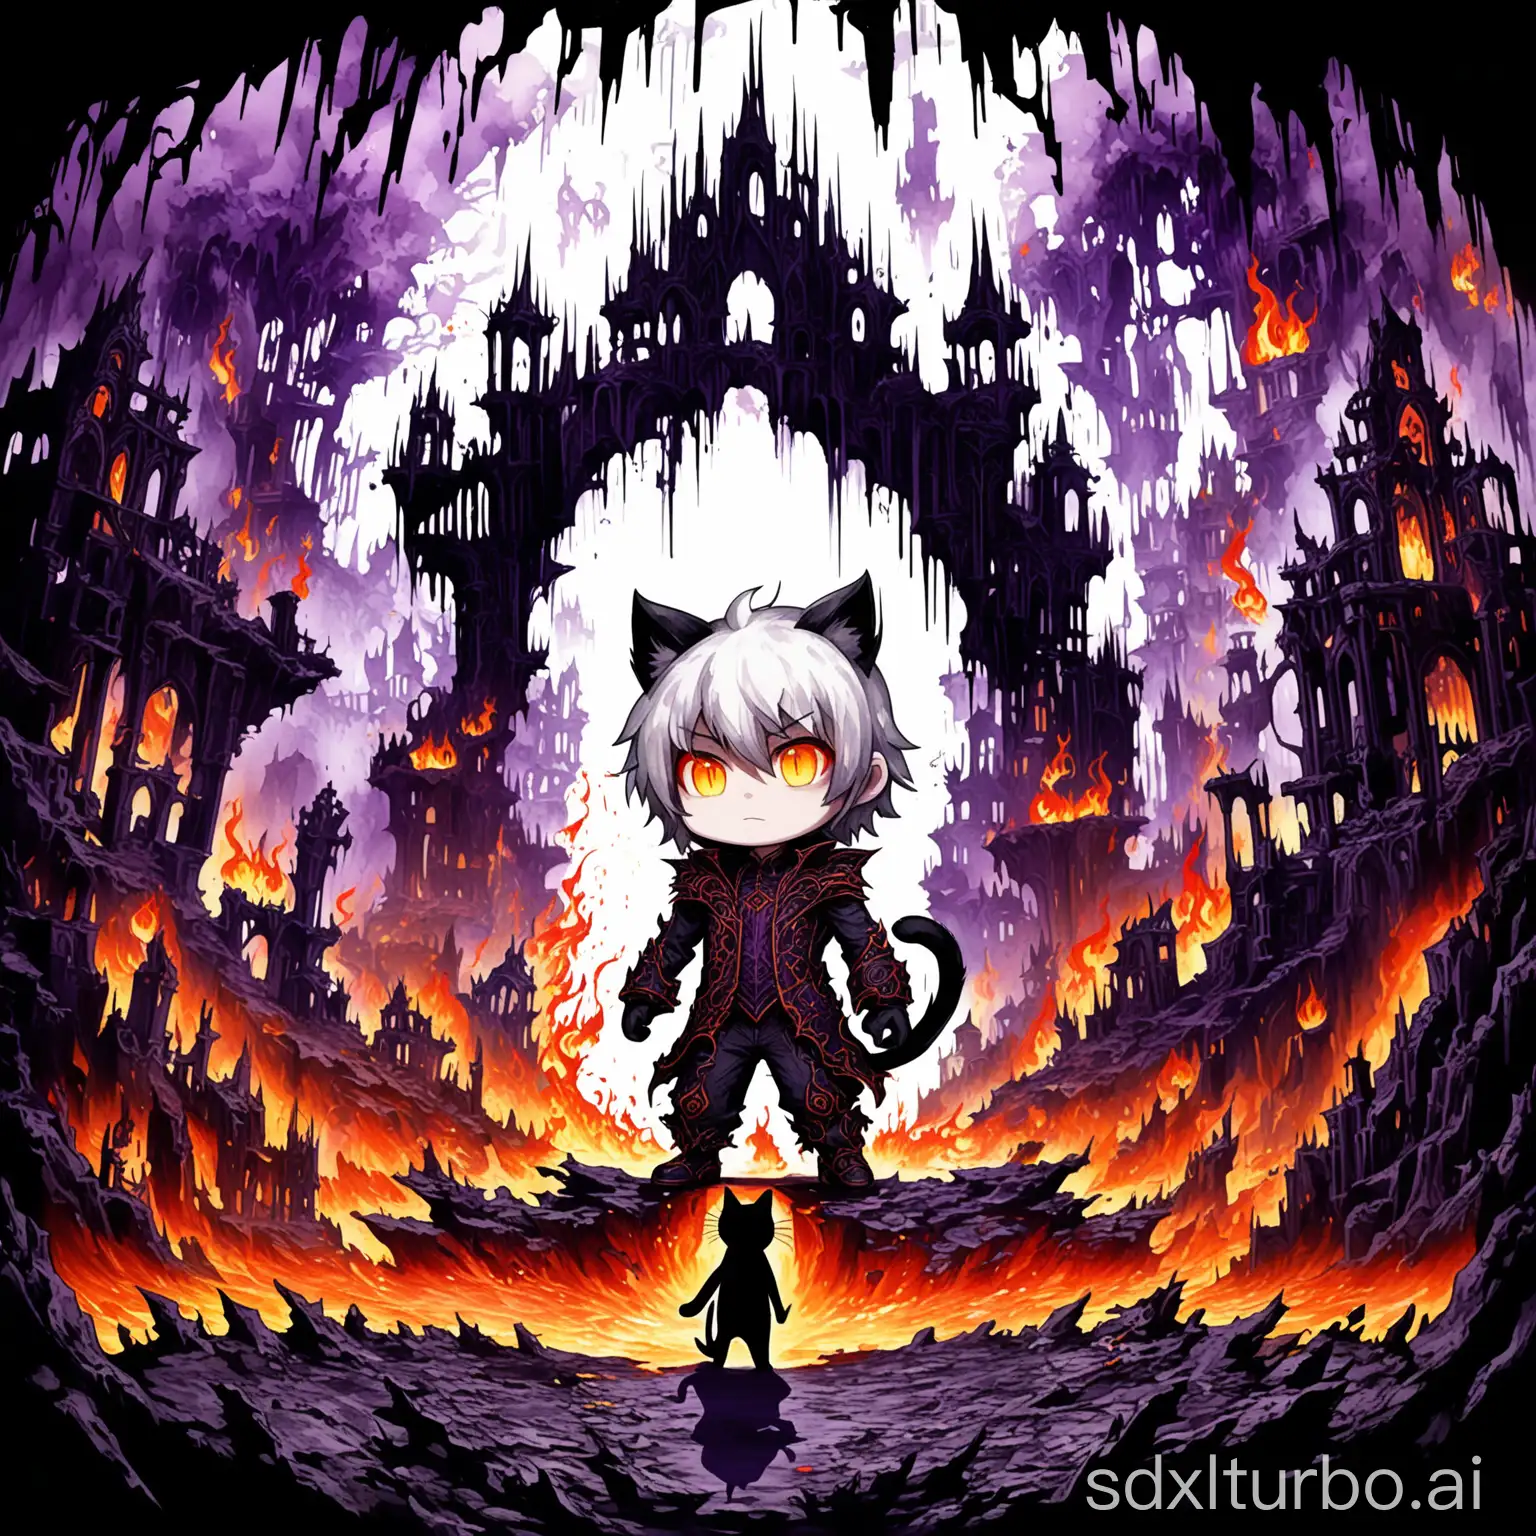 Chibi boy with cat ears and white hair, in a purple dungeon, with explosive animations, intricate shadows, detailed projections, Gothic elements, high contrast, rich colors, lush vegetation, floating islands, futuristic city, overgrown ruins, flames, lava, character close-up, focus, enlargement, emphasis on character scale, without green background, enhanced with stunning details, scene explosions, particle effects, ink, oil painting, watercolor fusion, correct lighting and shadow details, inspired by Ludongjun Russell Dongjun Lu's Gothic style.